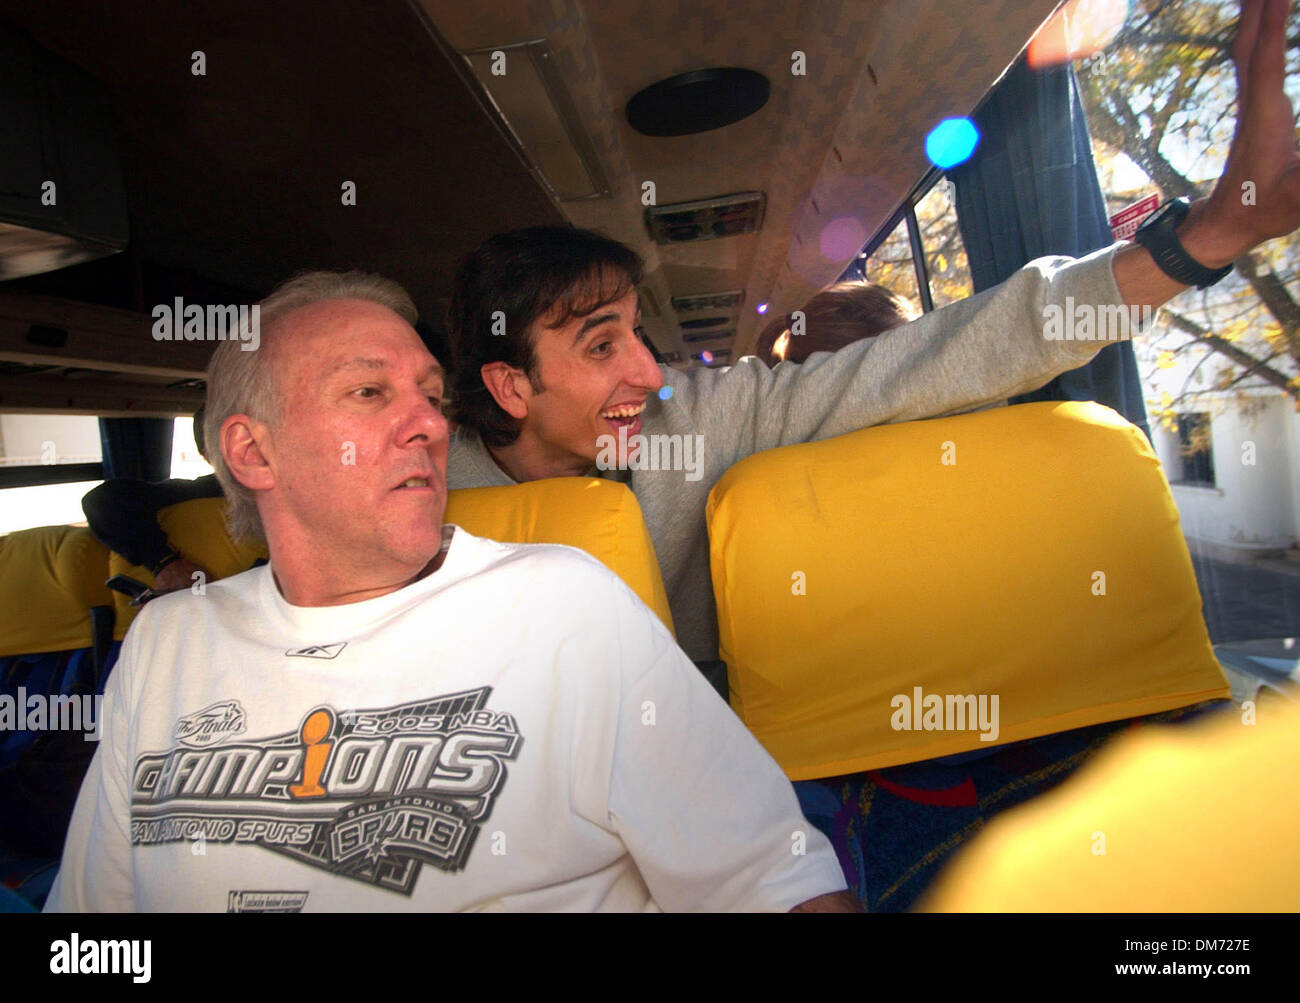 Jul 04, 2005; Bahia Blanca, Argentina;  MANU GINOBILI waves to an aunt he spotted in the crowd as his bus drives through Bahia Blanca, Arg., his hometown, after arriving Monday, July 4, 2005. At left is Spurs Coach Gregg Popovich. Mandatory Credit: Photo by Bob Owen/San Antonio Express/ZUMA Press. (©) Copyright 2005 by Bob Owen/San Antonio Express Stock Photo